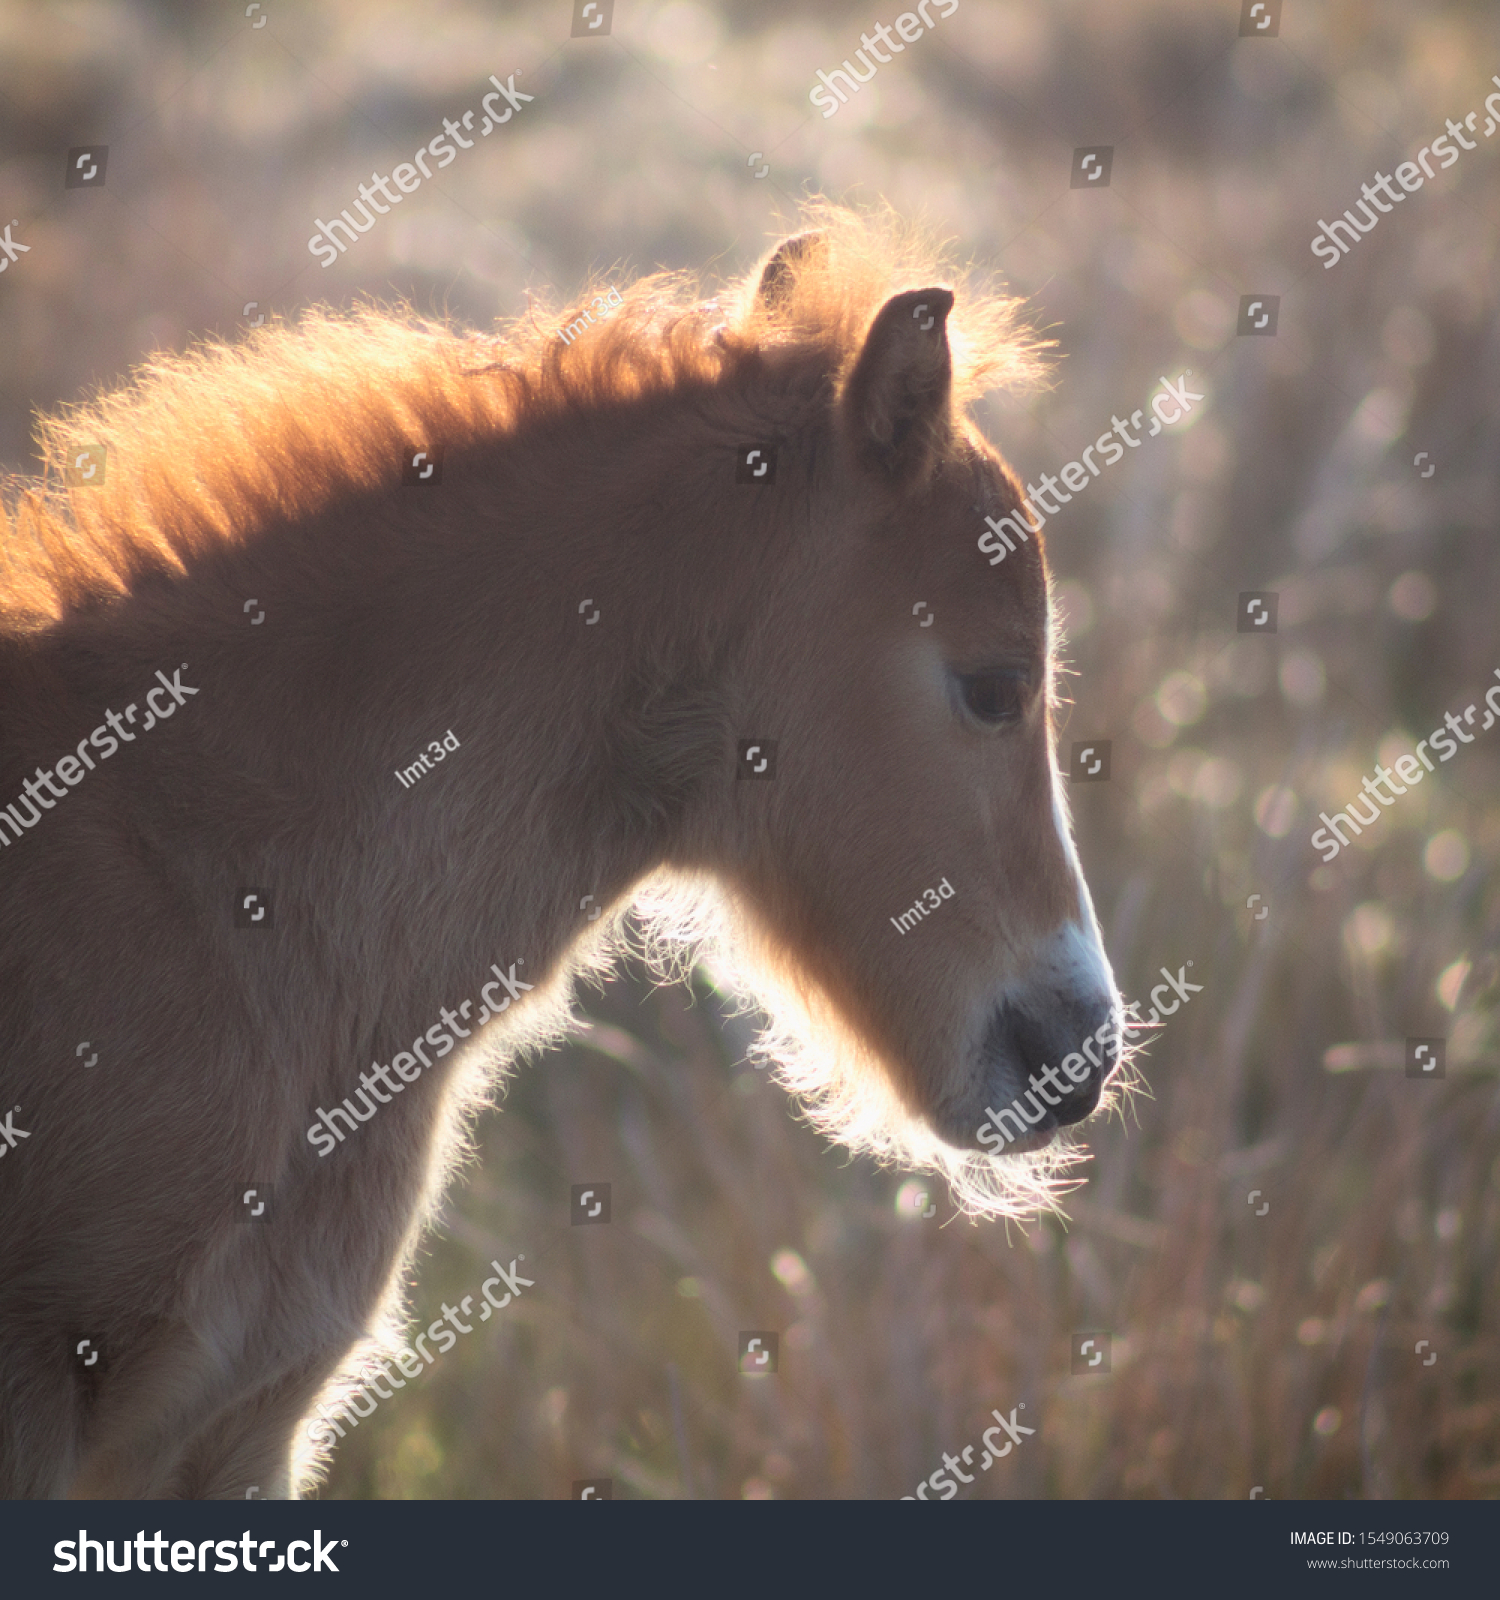 Portrait of a foal (young horse) #1549063709